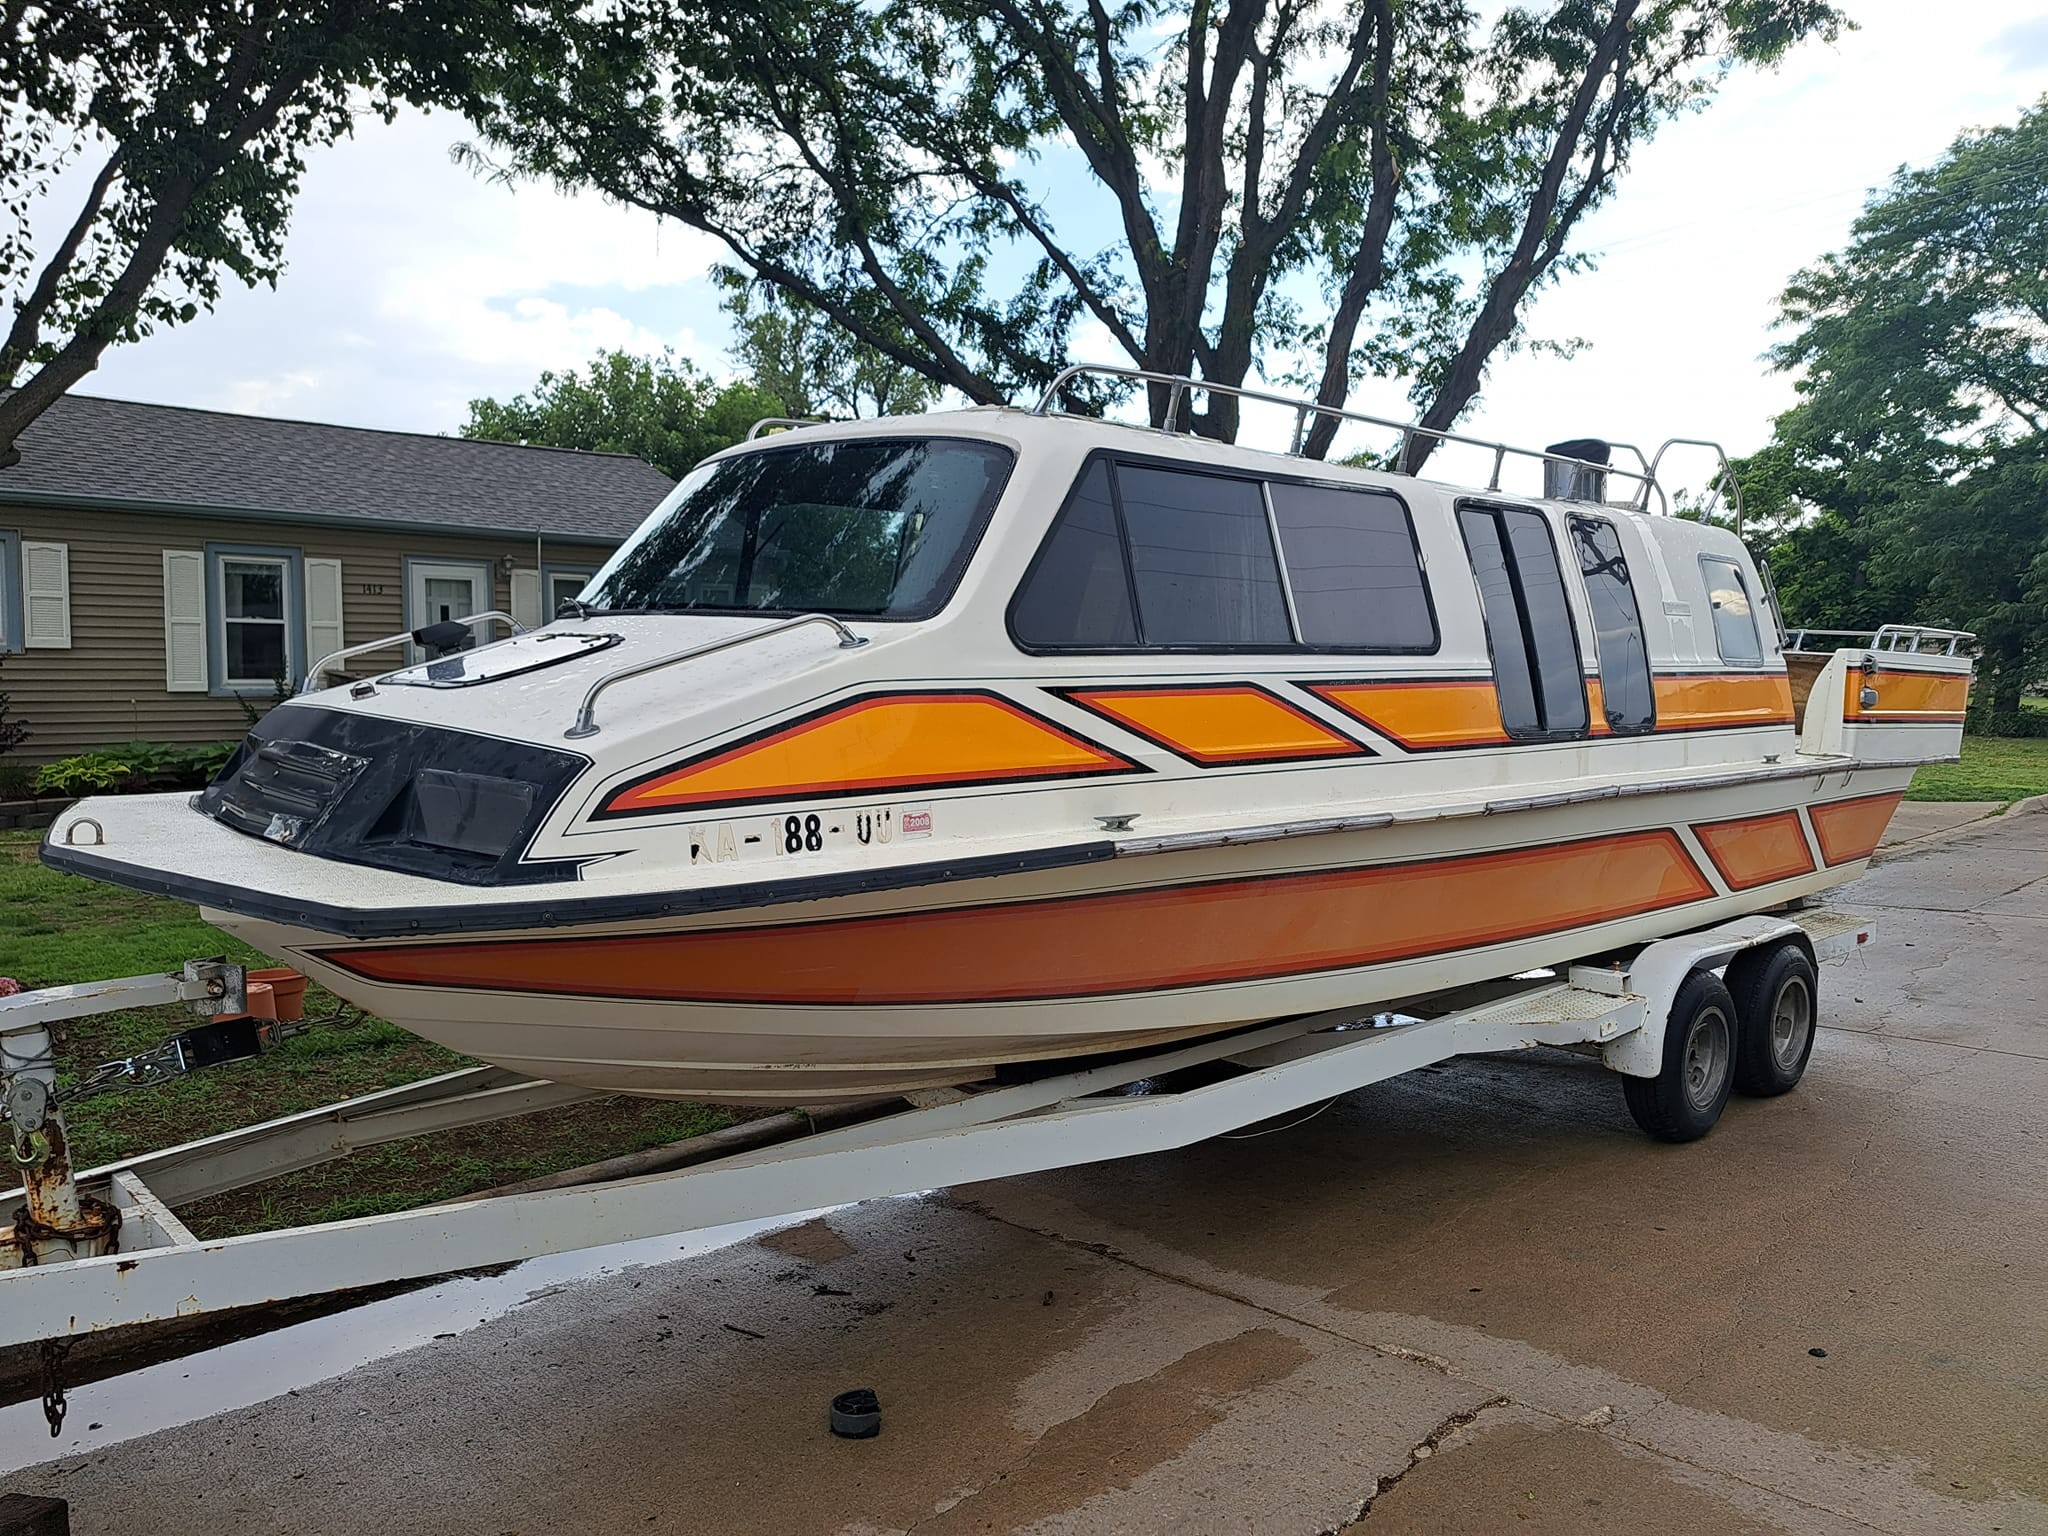 This Retro Boat is the Ultimate Conversion Van, Taking Parts from a Dodge Van and Foxbody Mustang